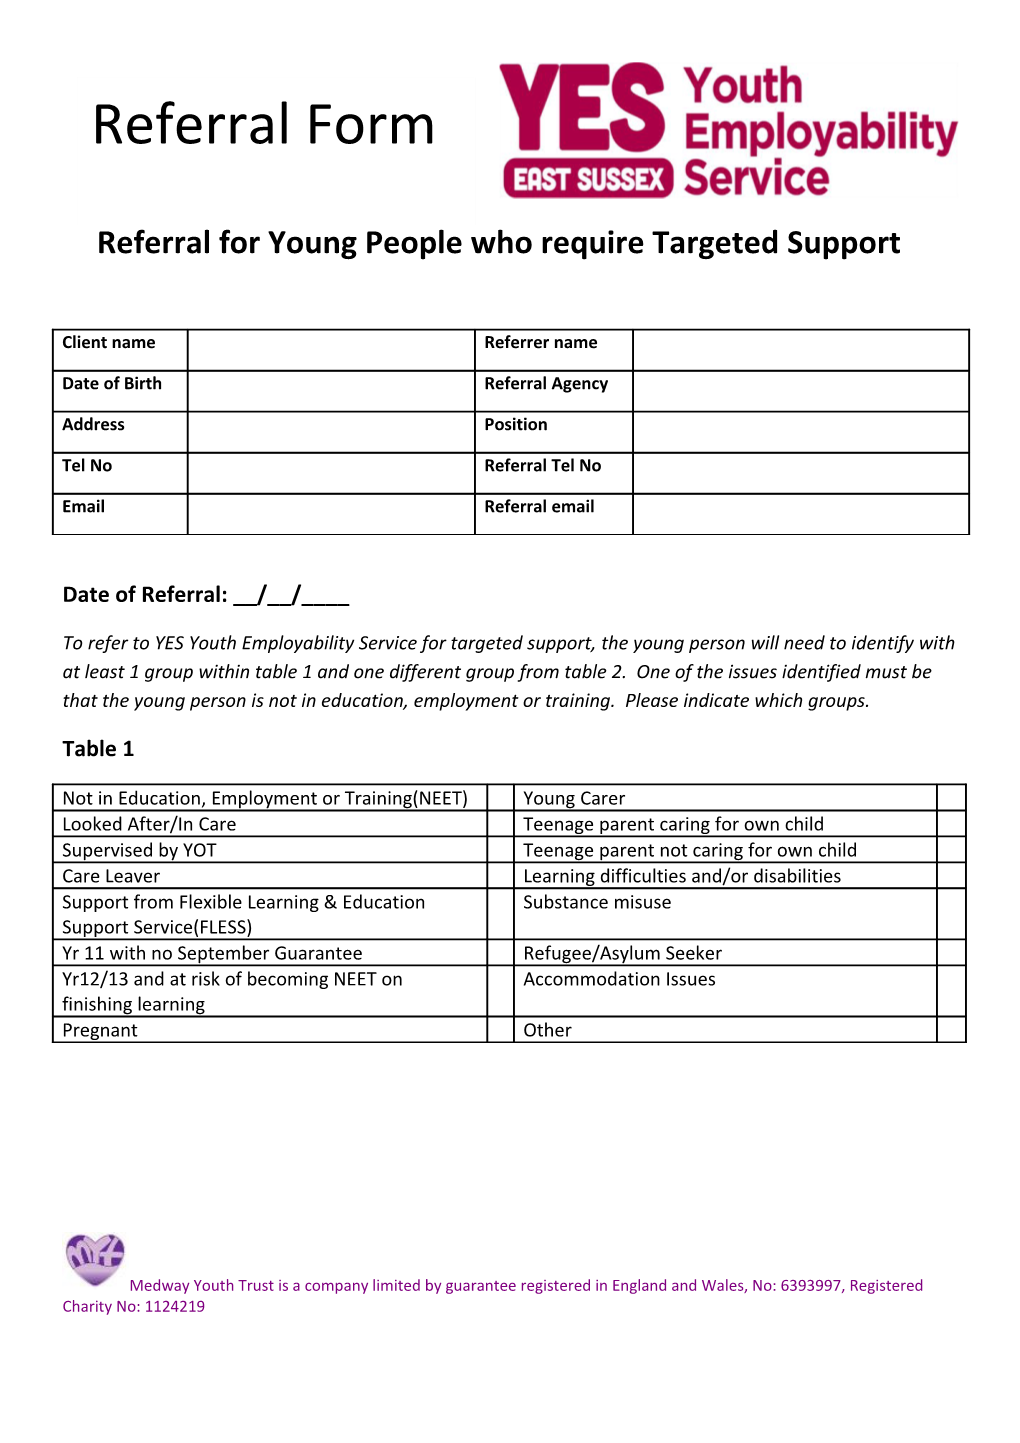 Referral for Young People Who Require Targeted Support